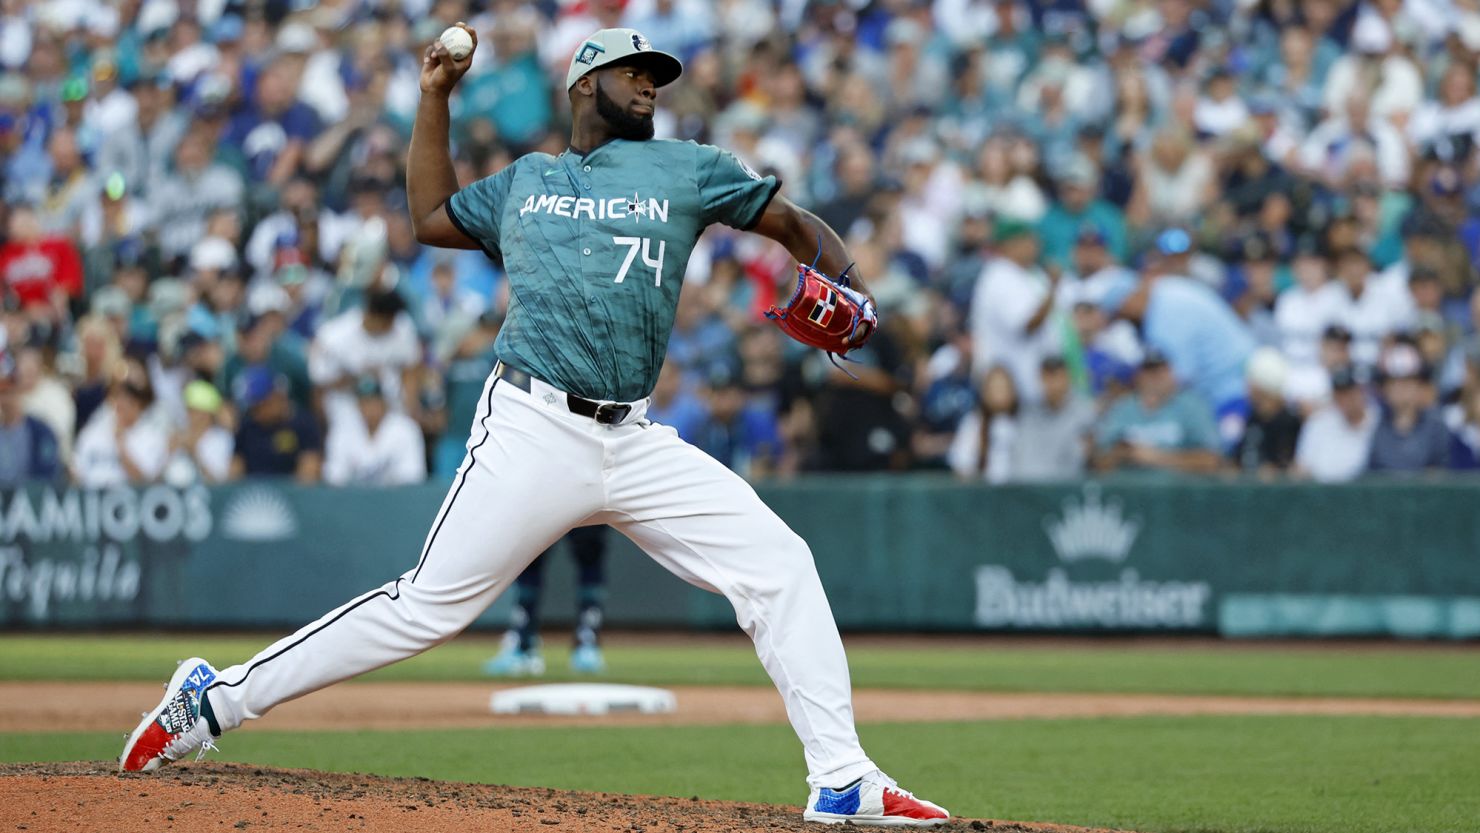 Félix Bautista throws a pitch during last season's All-Star game, where the fabric for the new uniforms debuted.